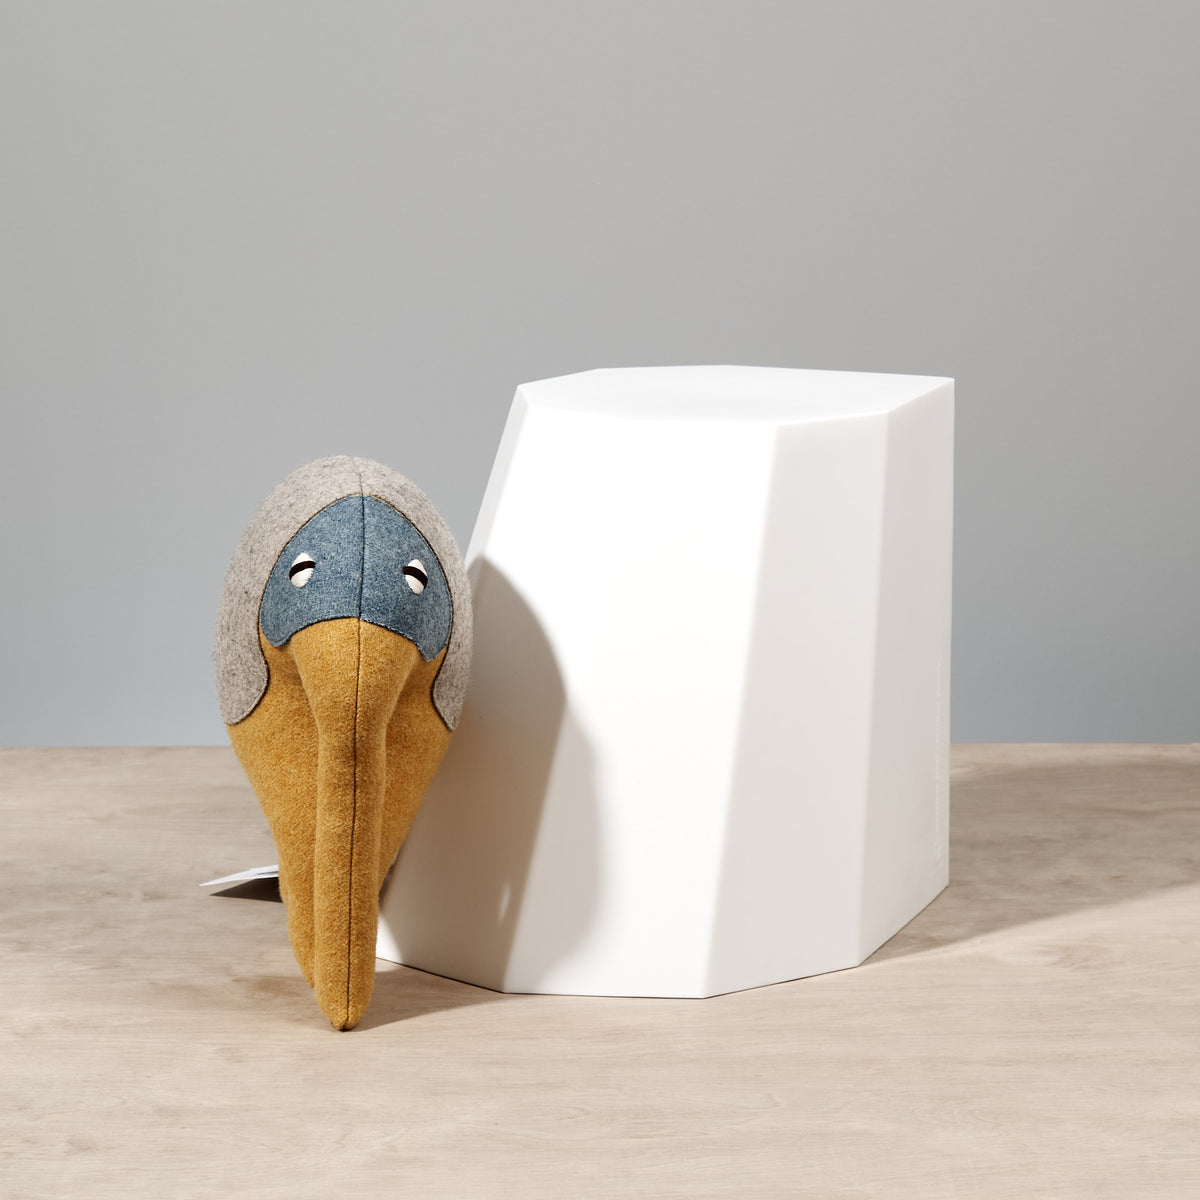 An Arnoldino Stool – Chalk sits on top of a white cube. (Brand: Martino Gamper)